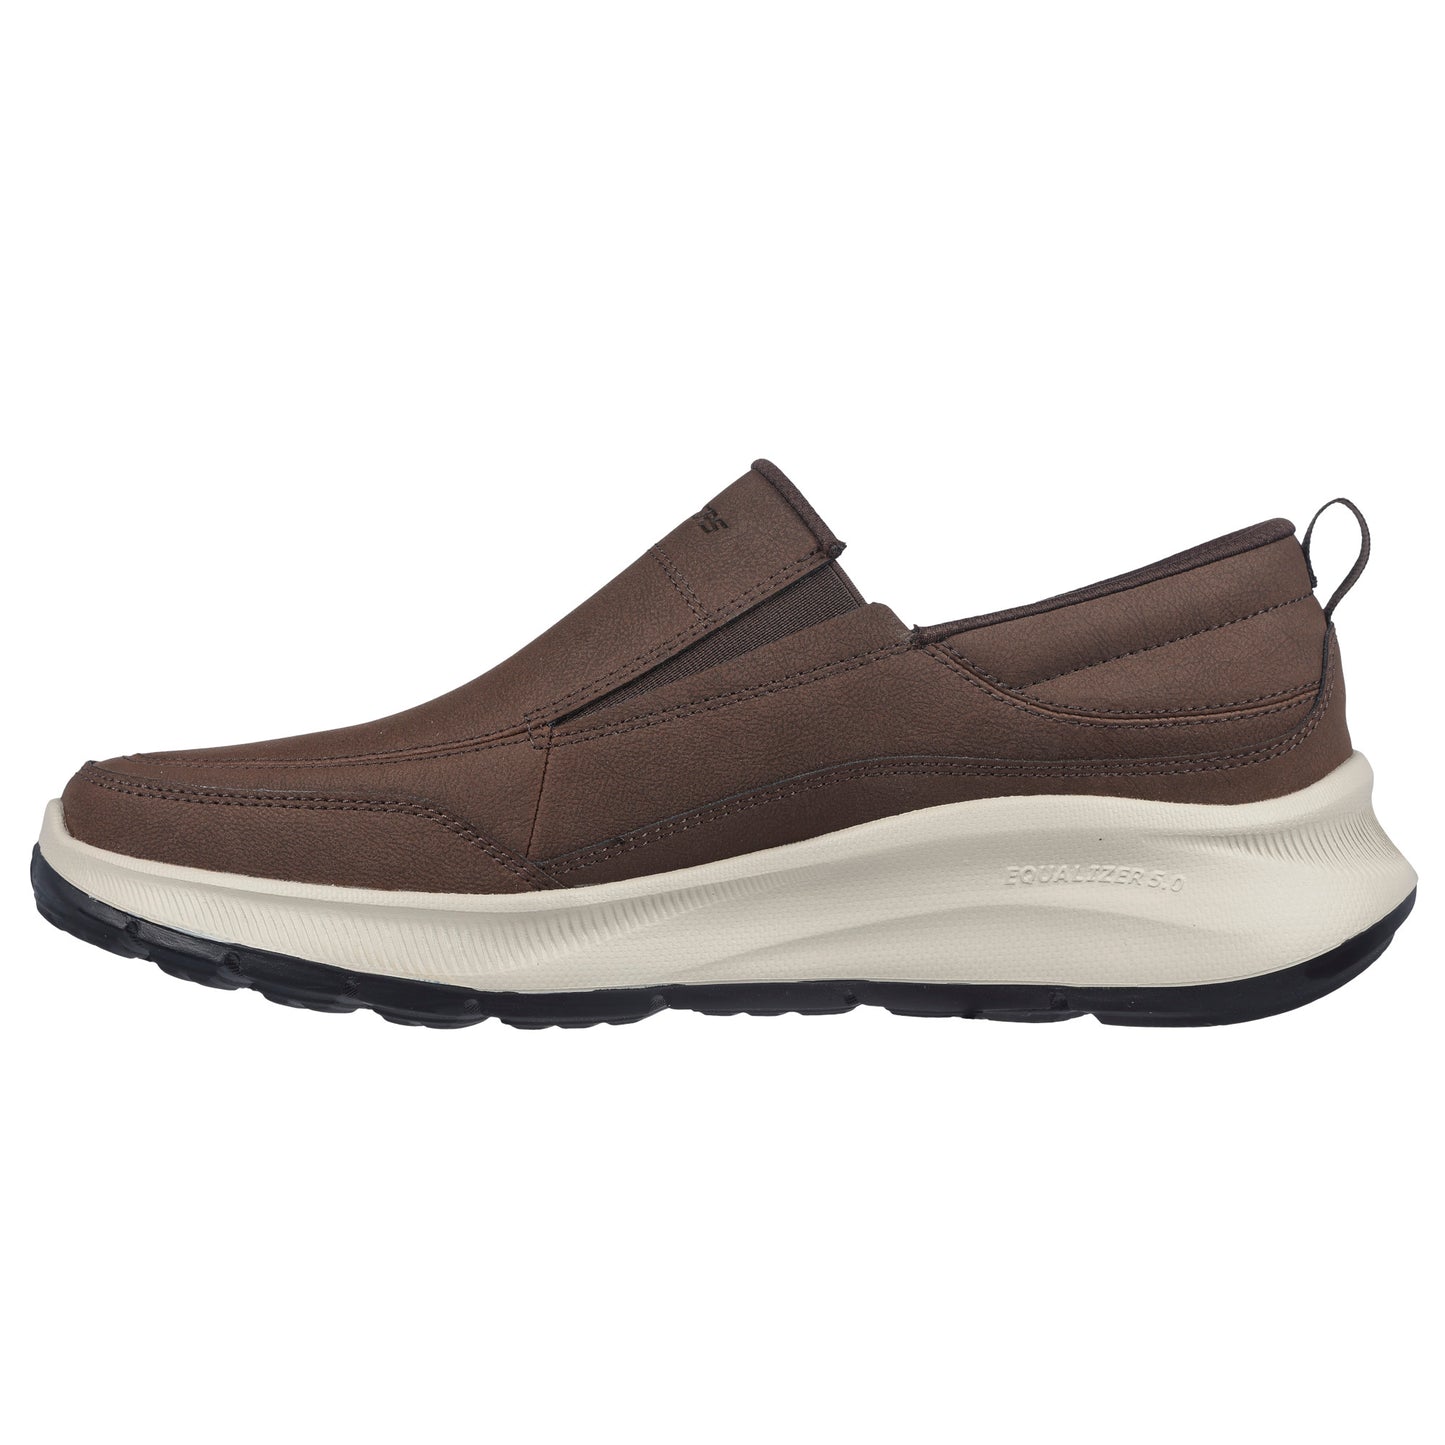 Skechers 232517 Equalizer 5.0 - Harvey Chocolate Brown Trainers